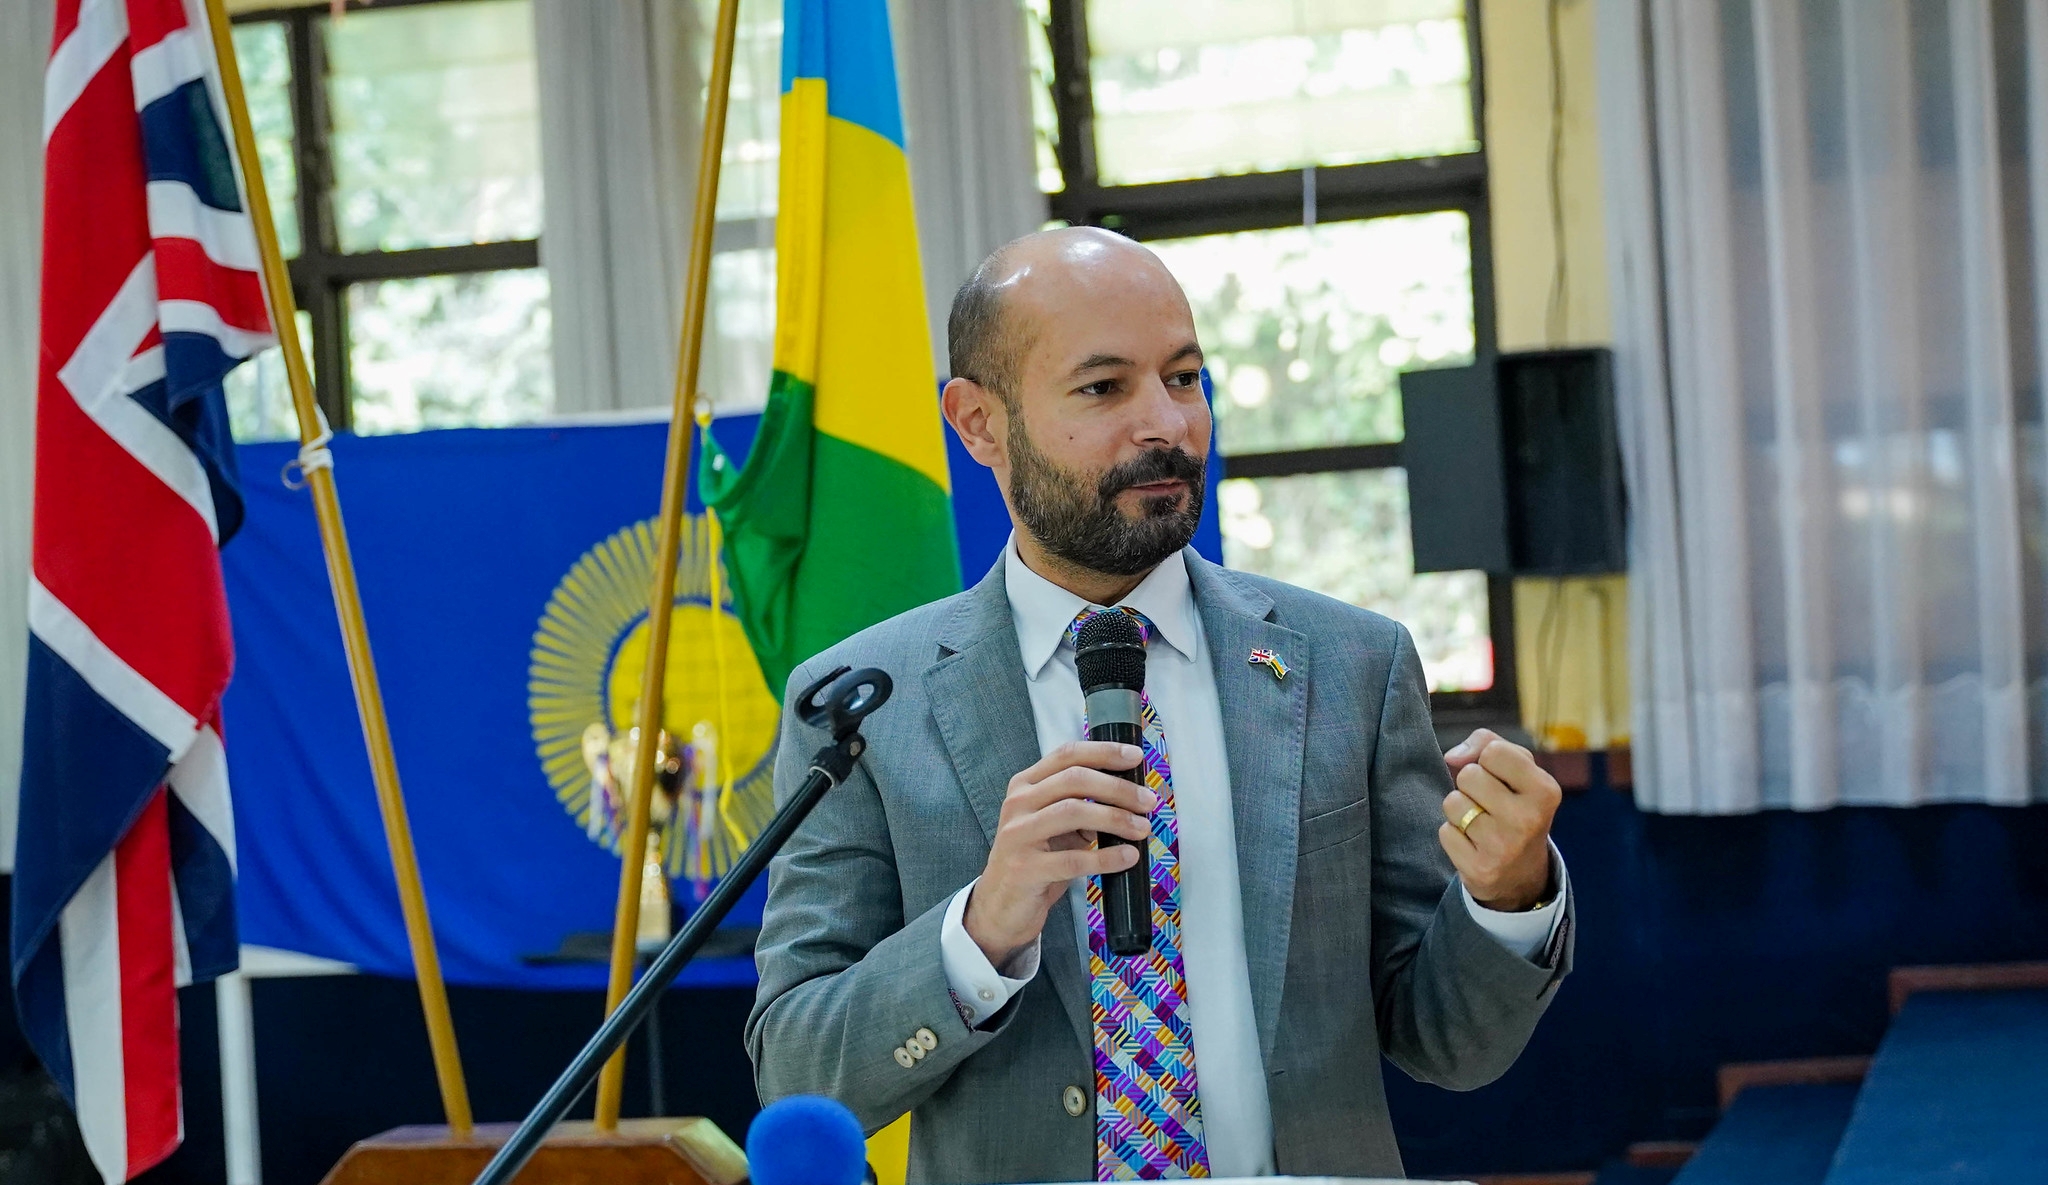 British High Commissioner to Rwanda Omar Daair once again defended the UK's recent Migration and Economic Development Partnership with Rwanda, whereby a number of illegal immigrants who reach the UK can now be relocated to Rwanda.